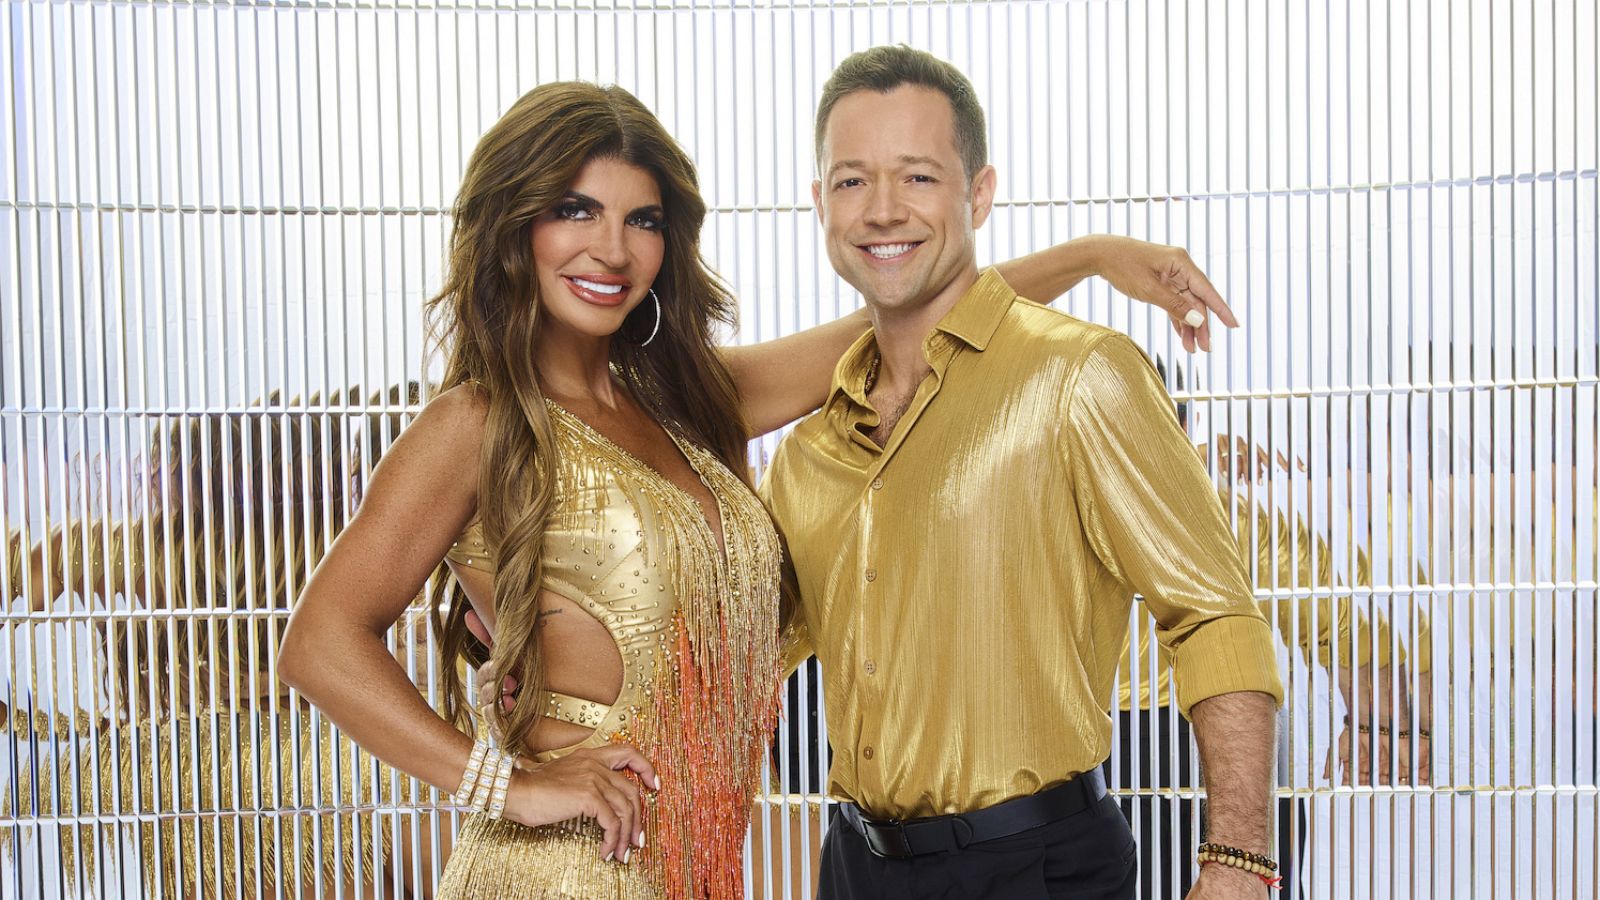 Dancing with the Stars 2022 See the official season 31 partner photos pic